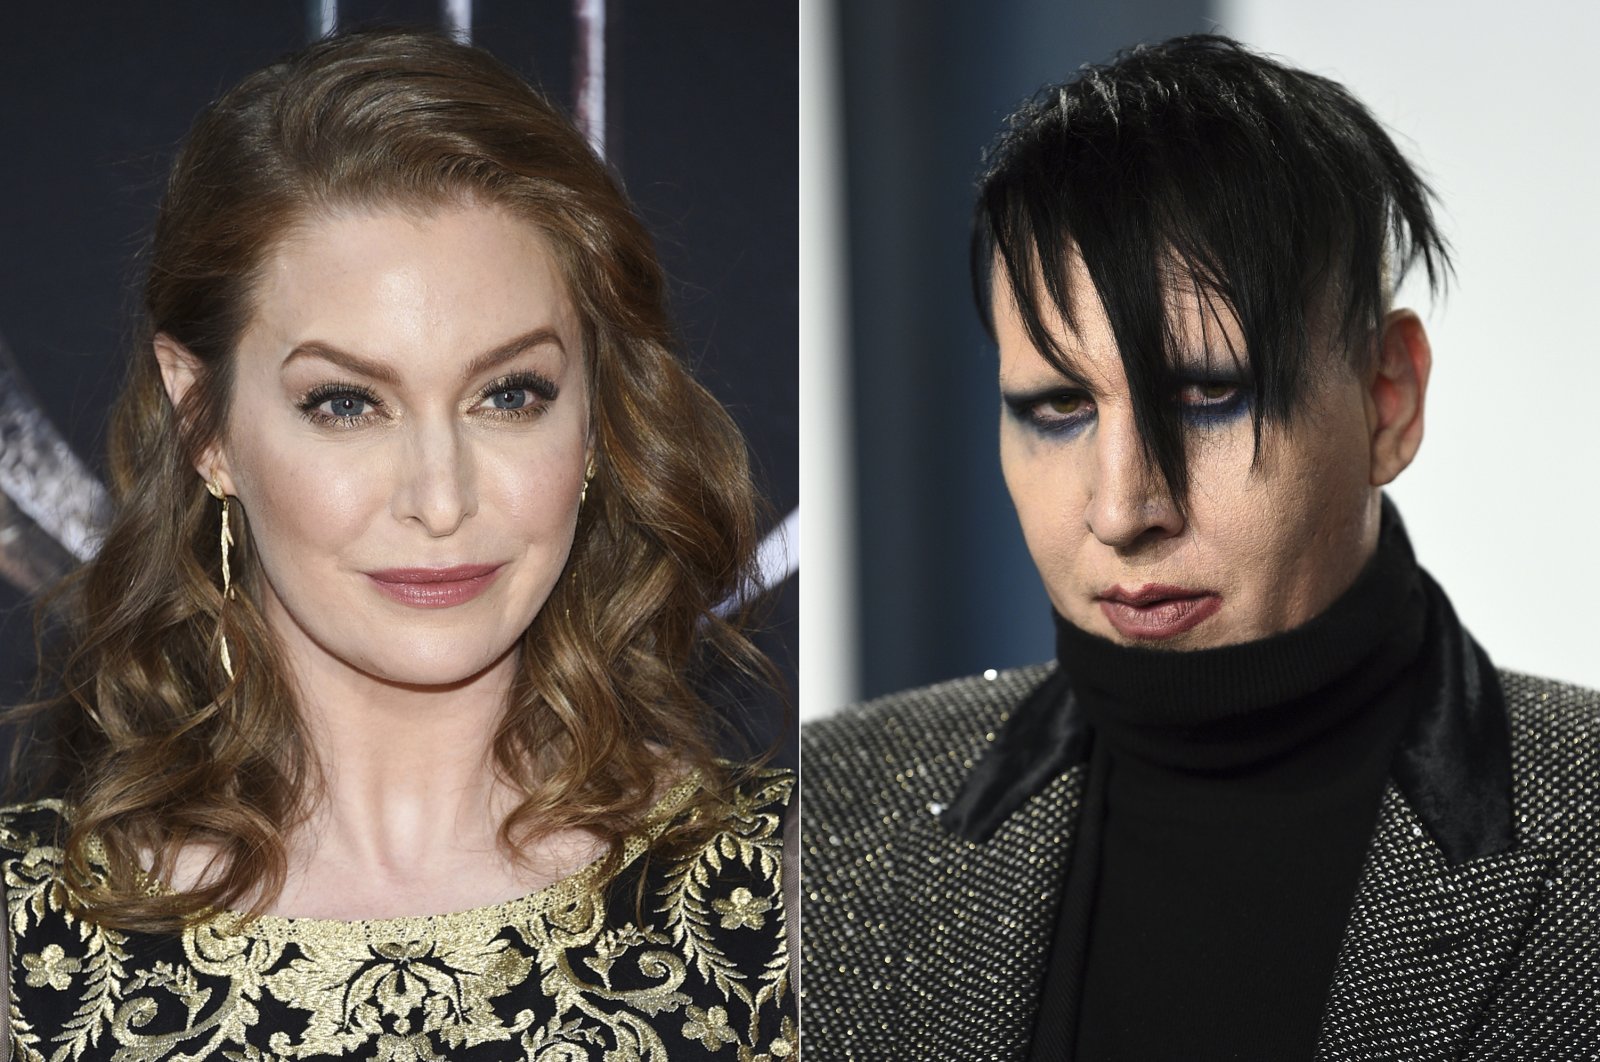 In this combination photo, actress Esmé Bianco appears at HBO's "Game of Thrones" final season premiere in New York, U.S., April 3, 2019, left, and musician Marilyn Manson appears at the Vanity Fair Oscar Party in Beverly Hills, Calif., U.S., Feb. 9, 2020. (AP Photo)